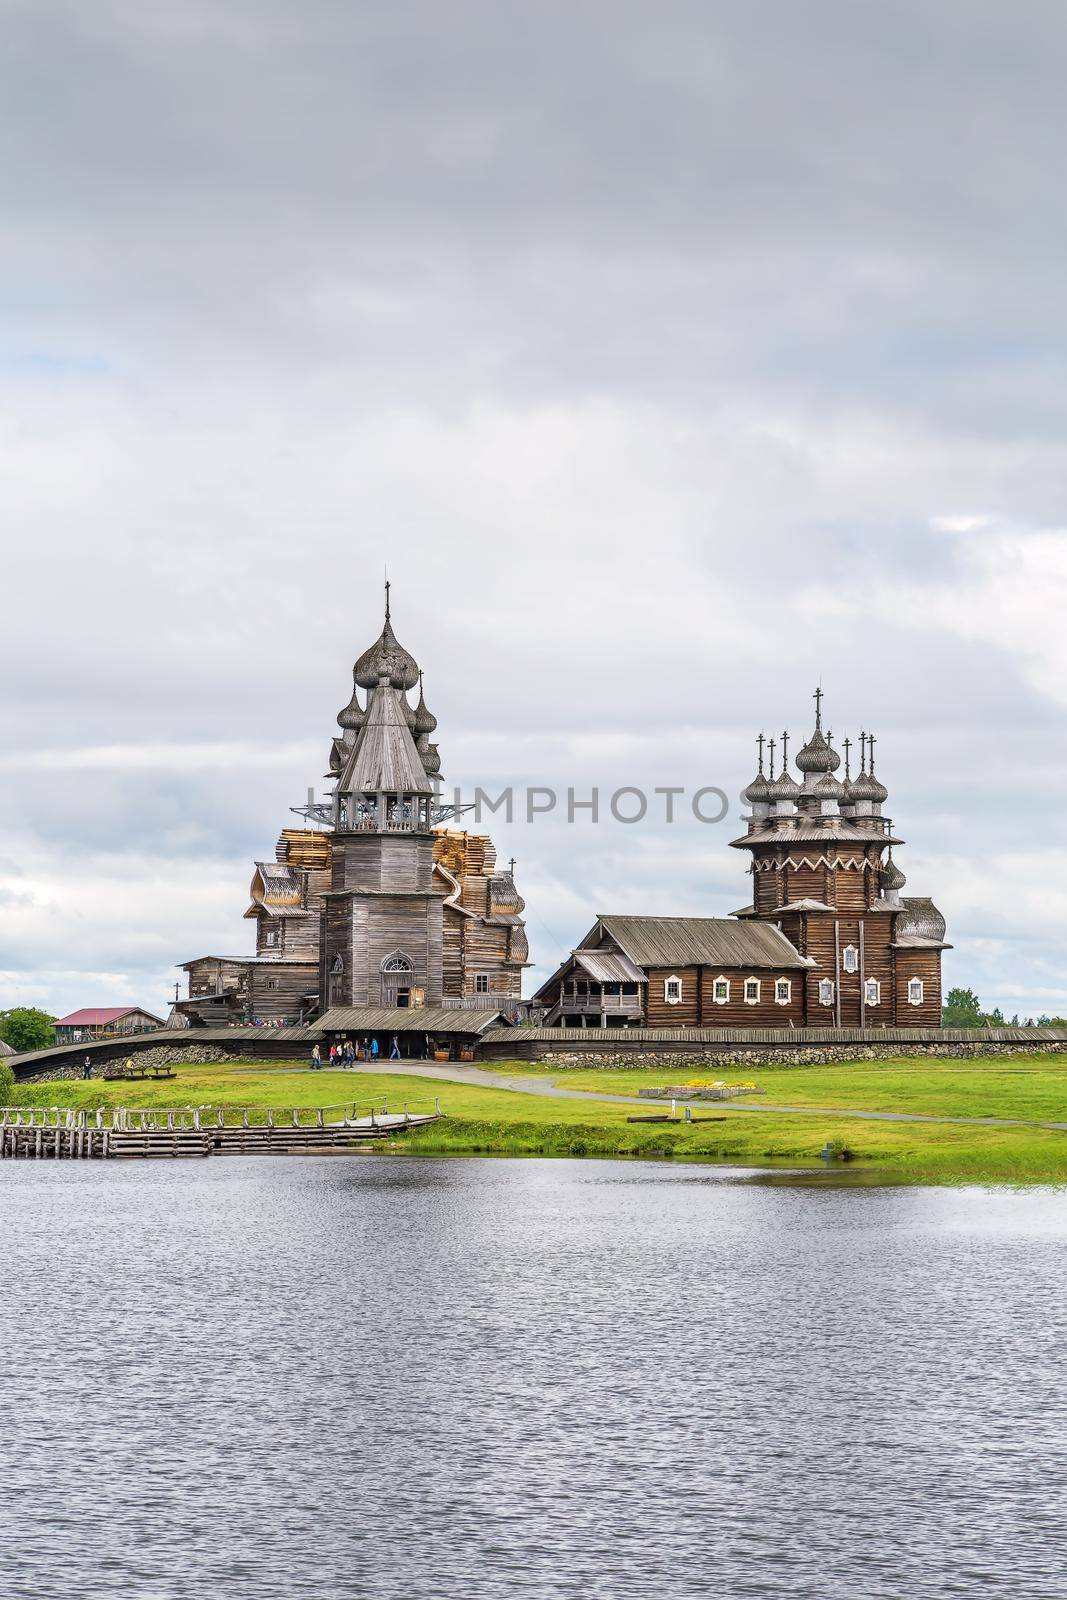 Historical site dating from the 17th century on Kizhi island, Russia. View from Onega lake